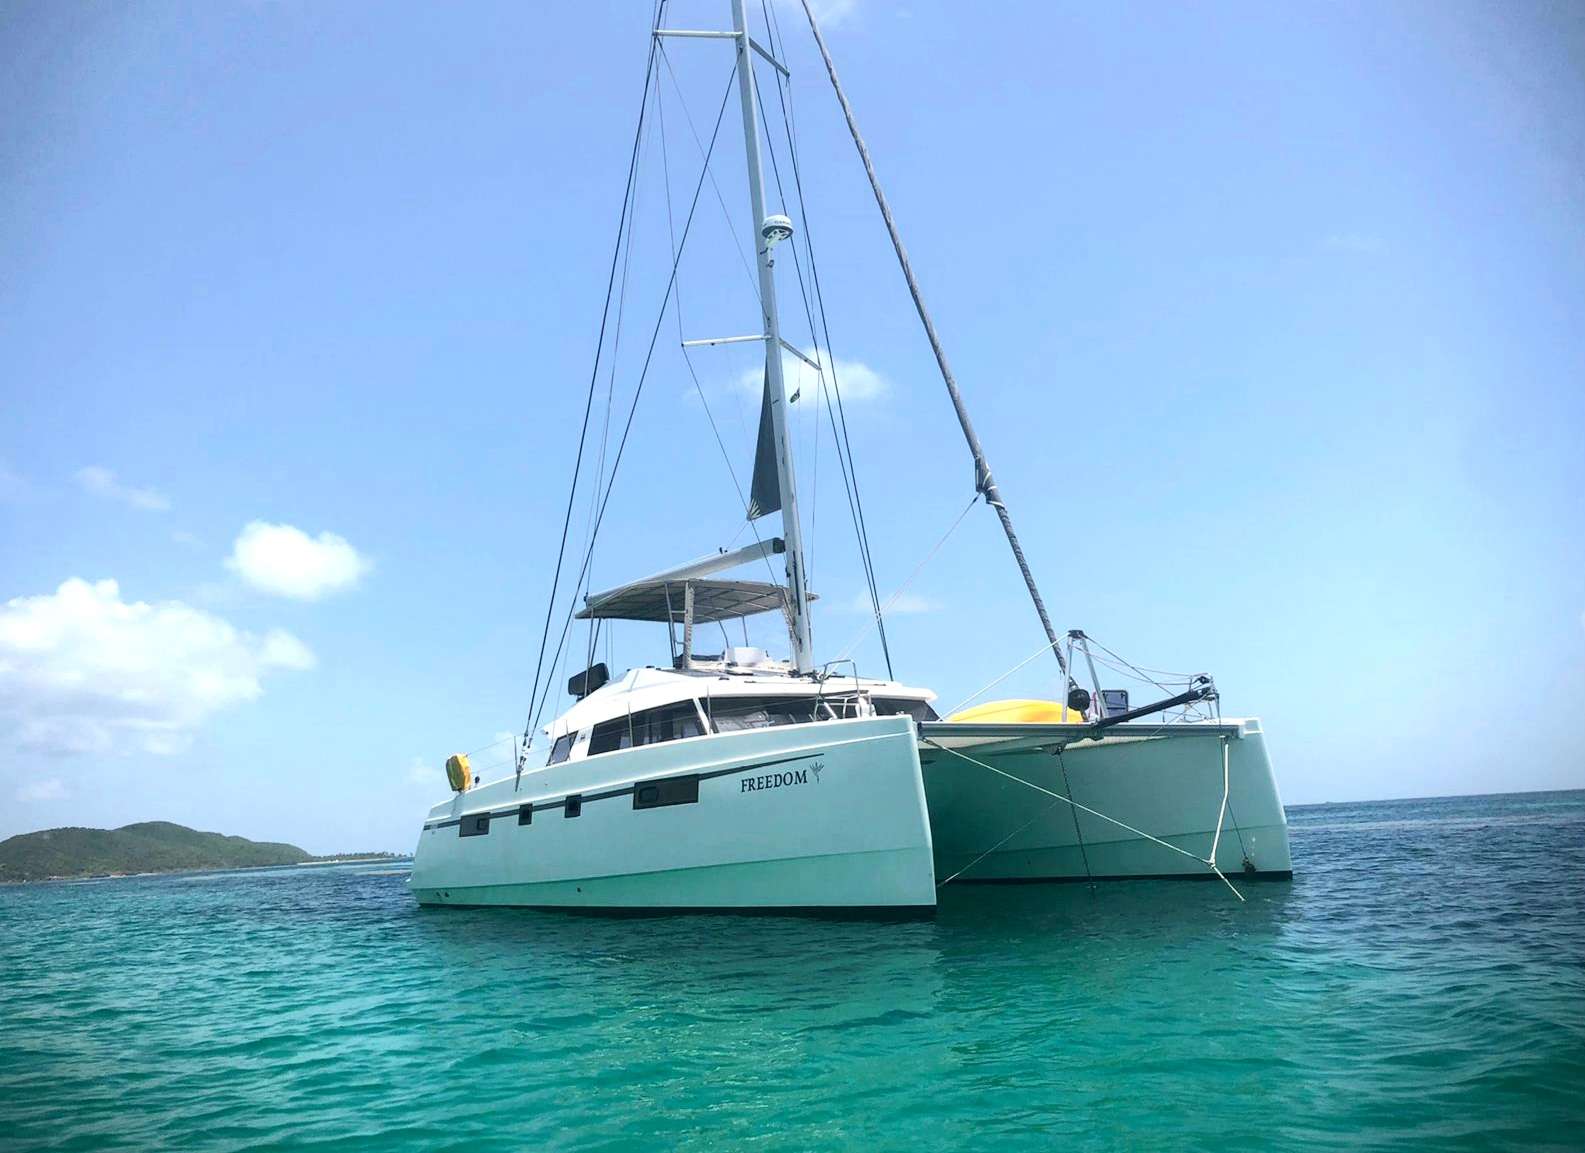 Freedom - Luxury yacht charter St Lucia & Boat hire in Caribbean 1